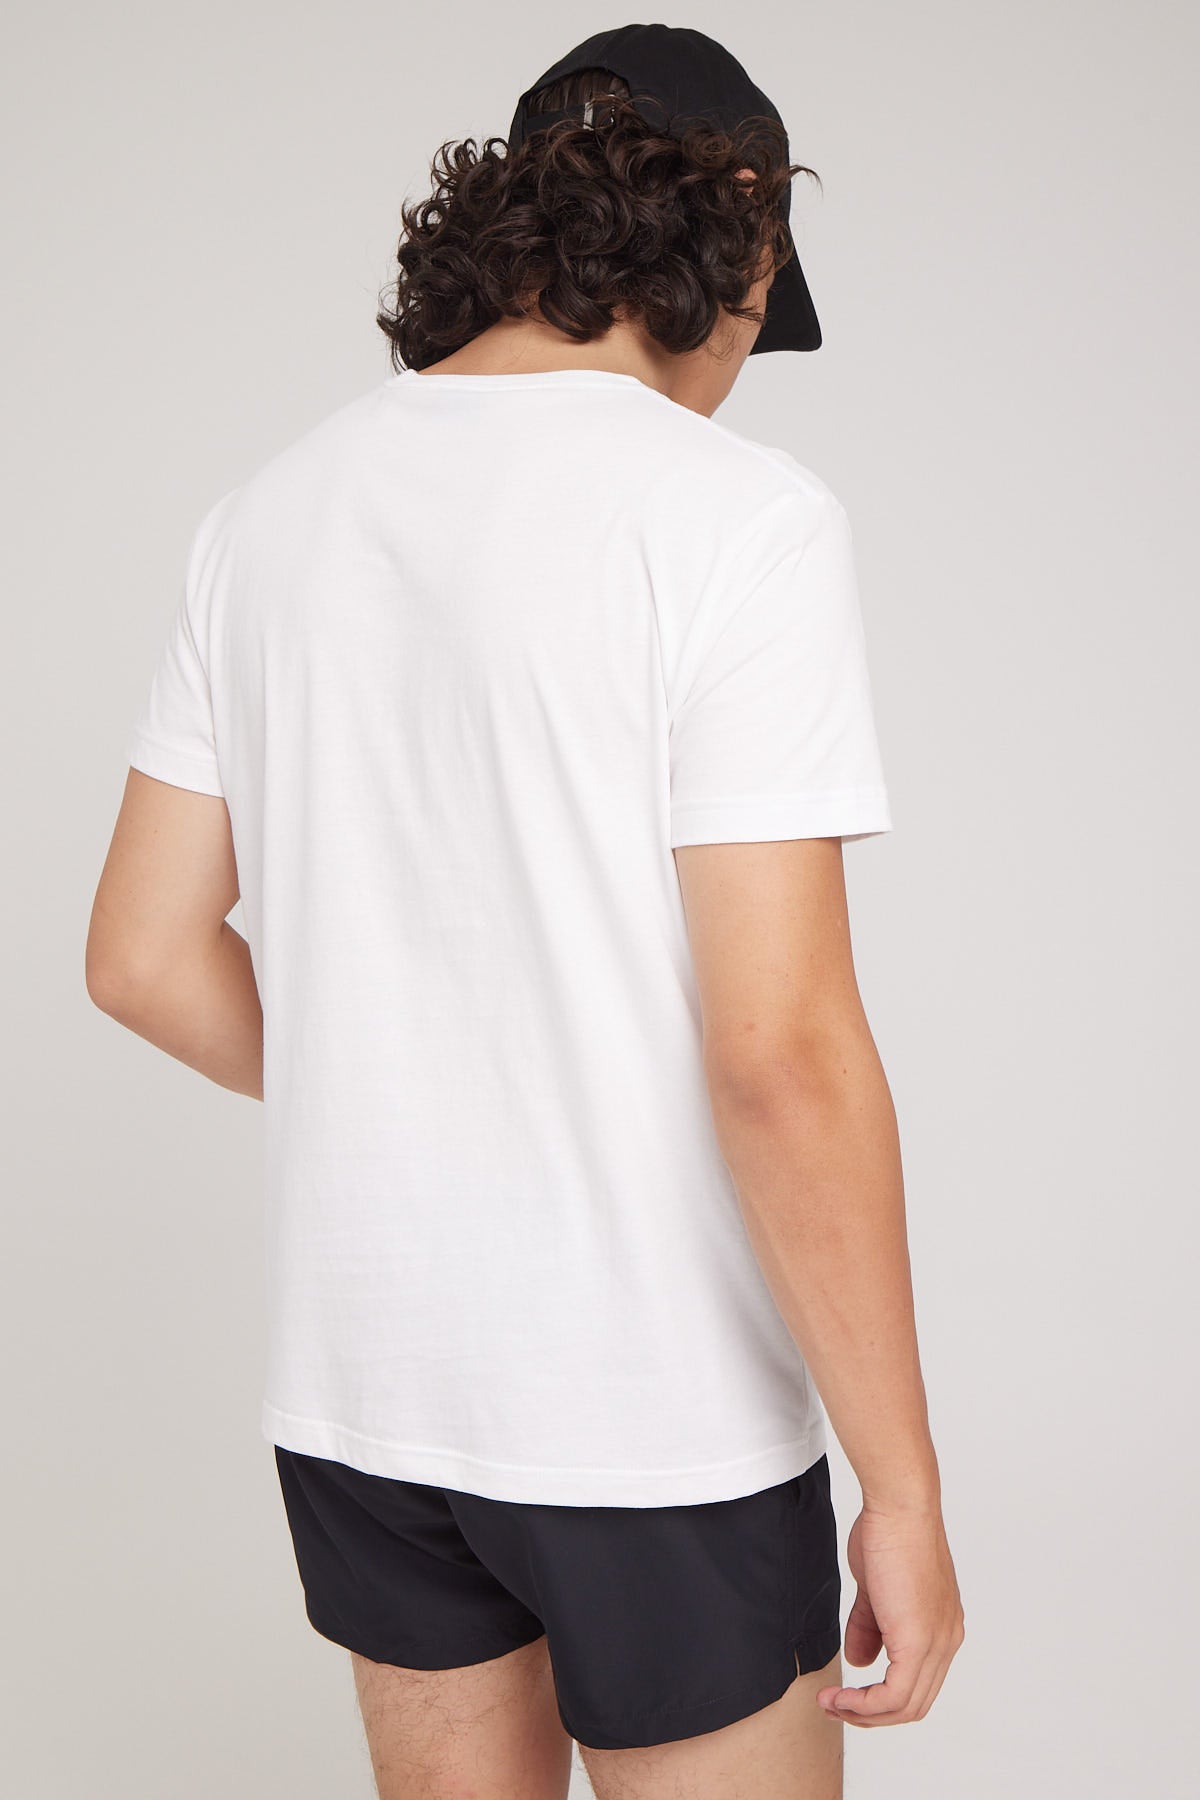 Gant Archive Shield Embroidery Tee White